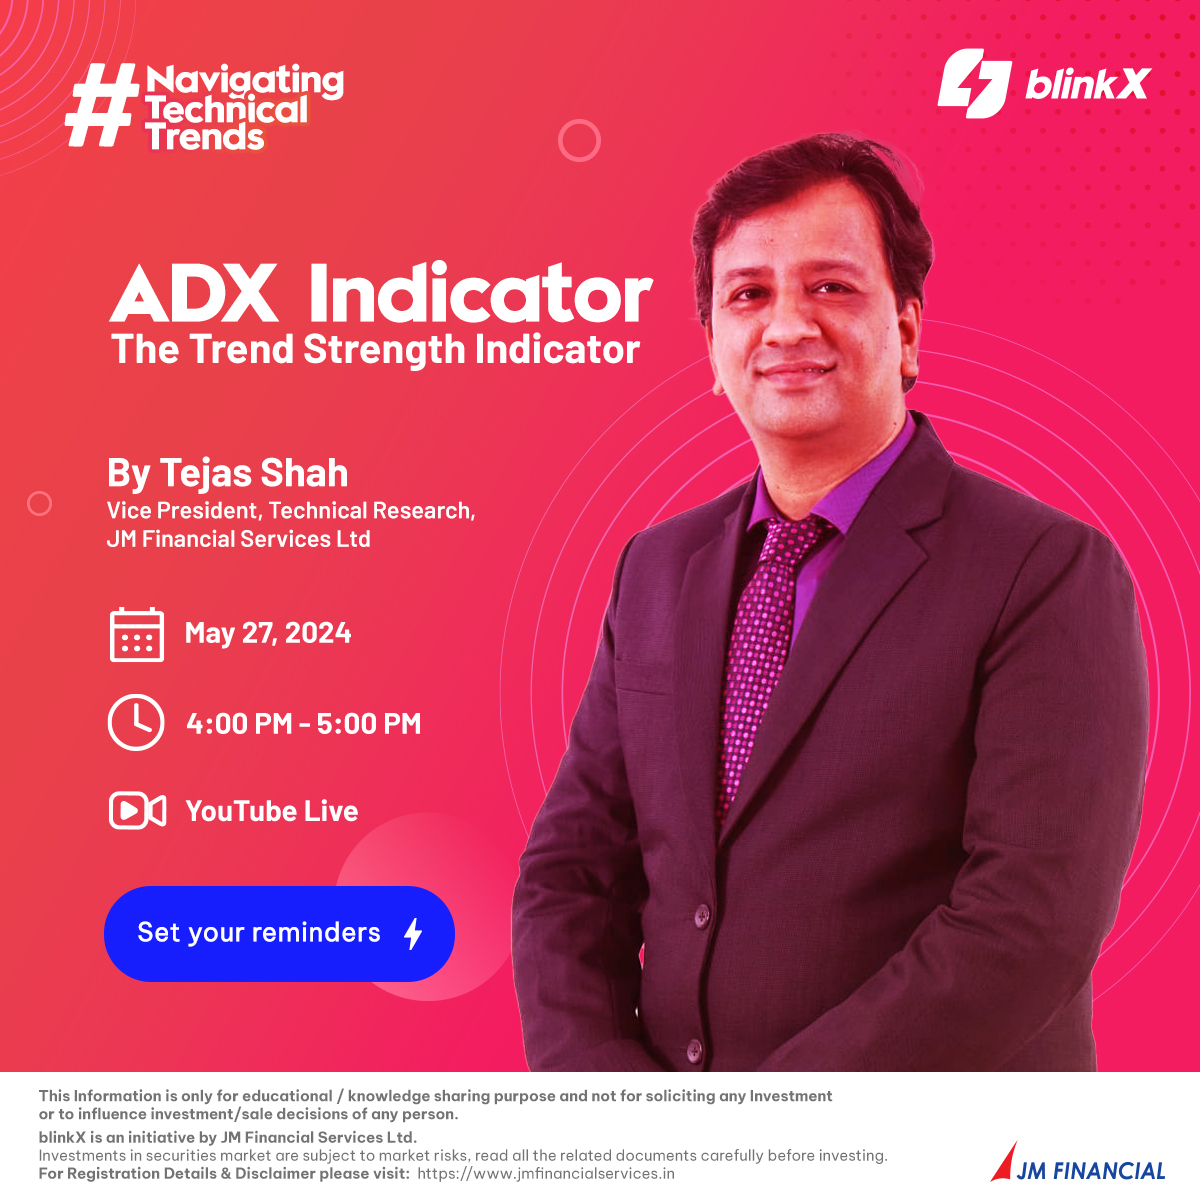 Join us for an exclusive Webinar with @tejasshah2512 as we explore the popular 'ADX Indicator – The trend strength indicator'

Don't miss out the opportunity to join us Live on YouTube and have your queries answered by the expert himself!

Webinar Link: youtube.com/live/t5s5LGXef…